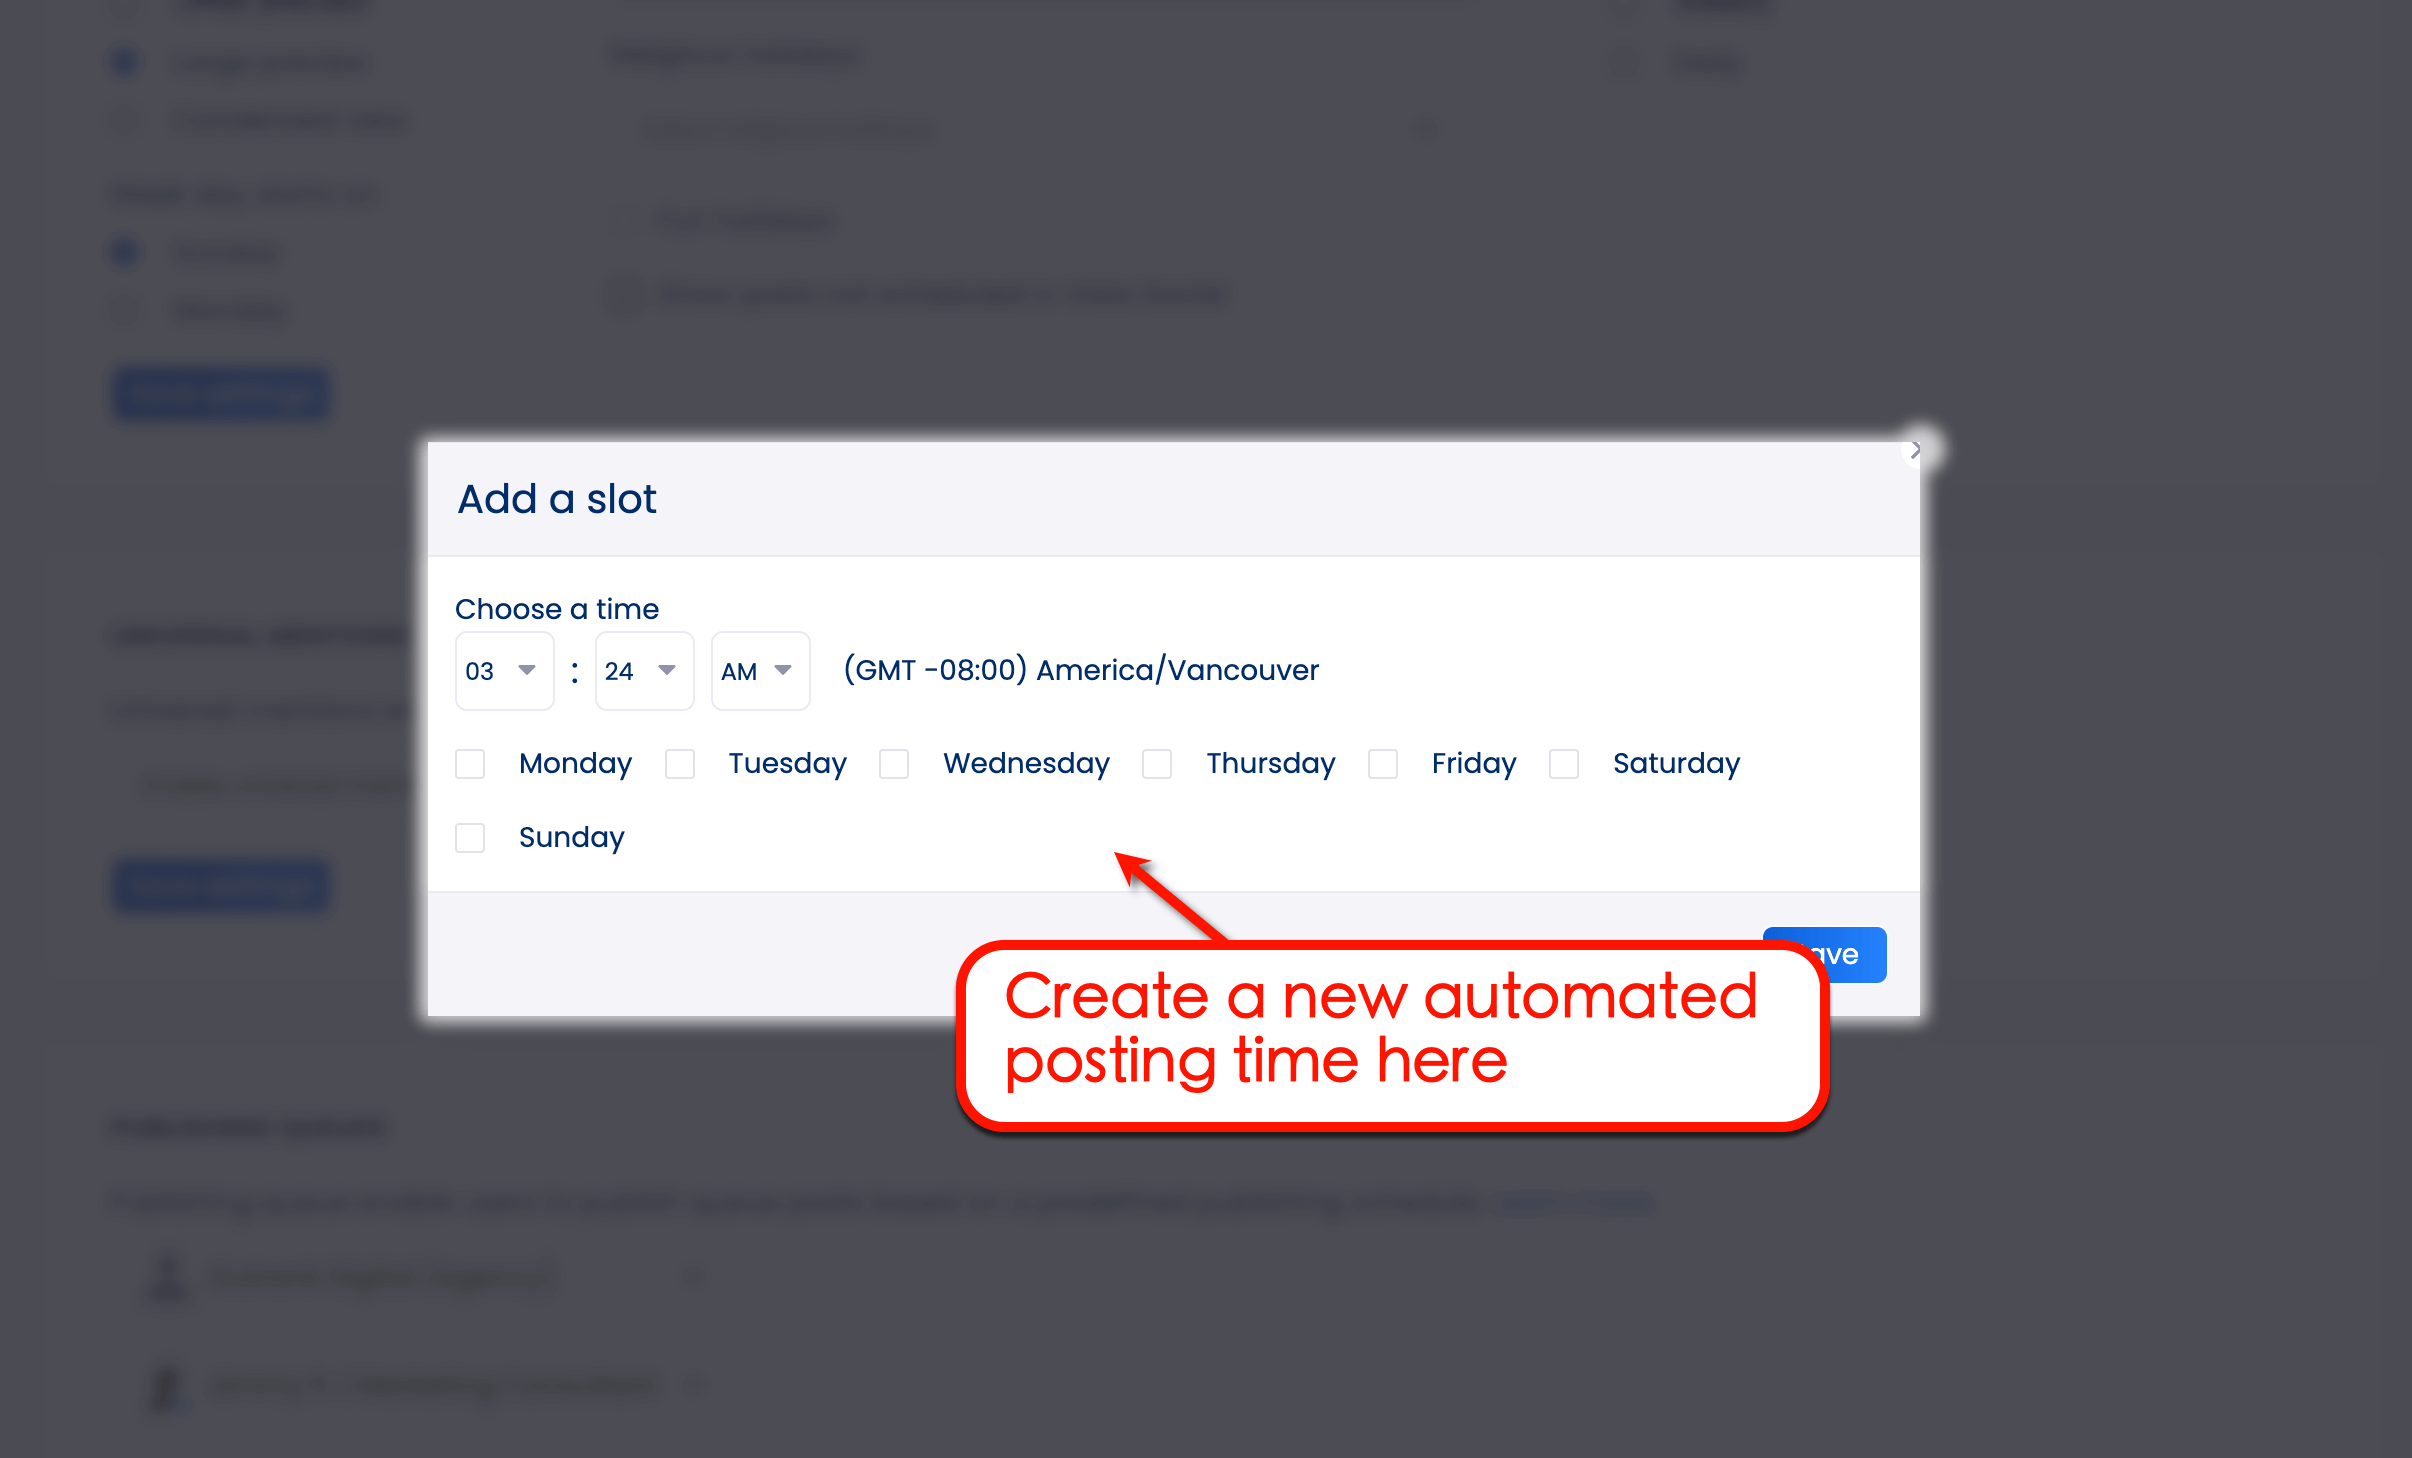 Add a slot to add a posting time to your automated calendar. 